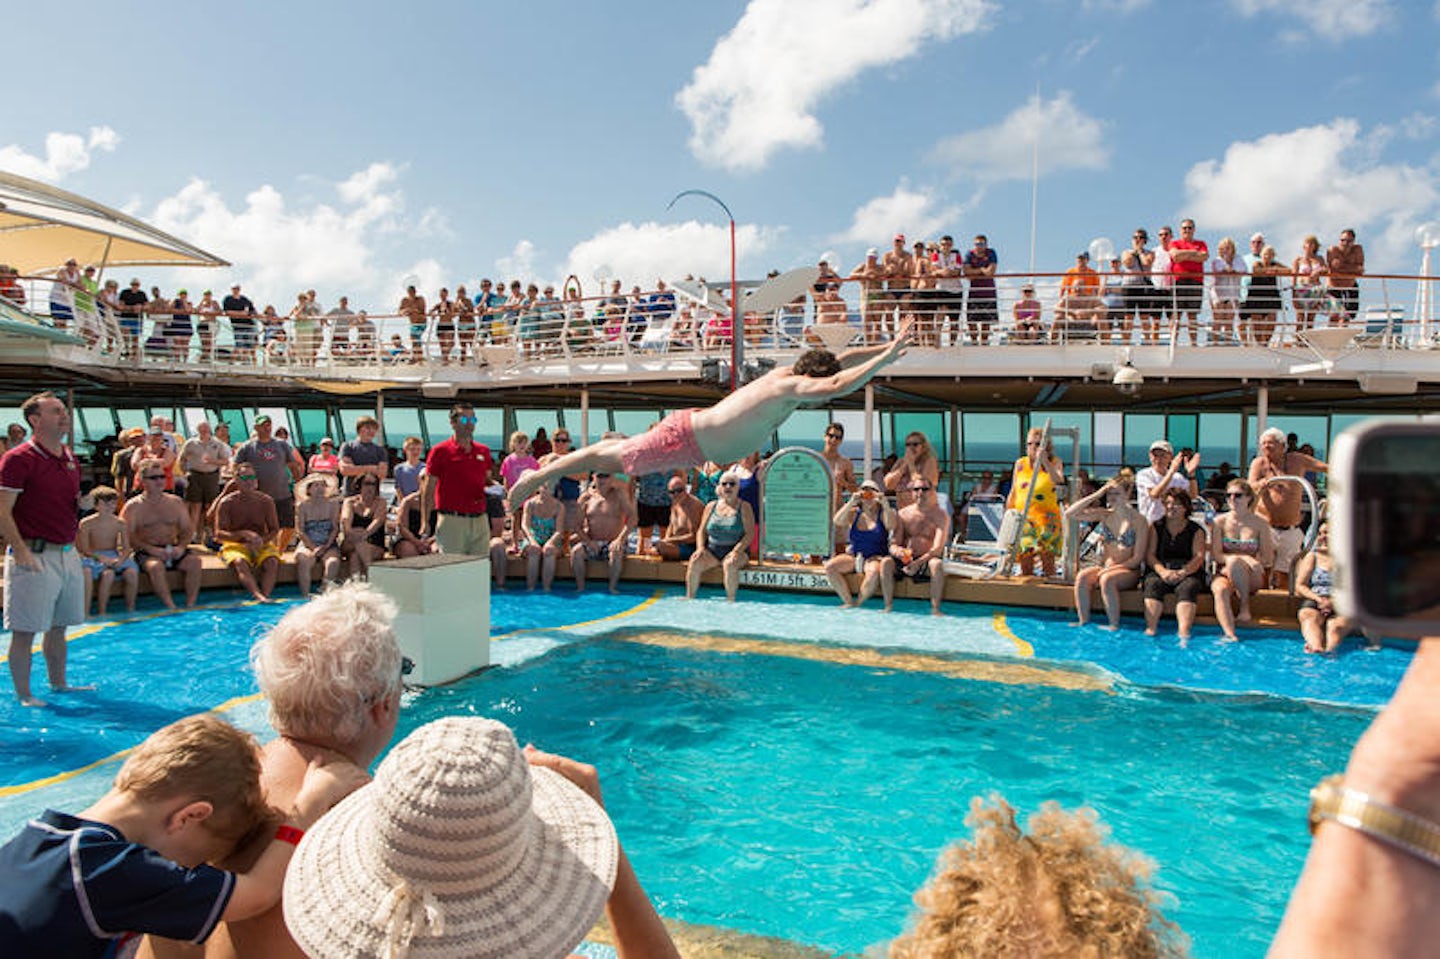 Men's Belly Flop Contest at the Main Pool on Vision of the Seas